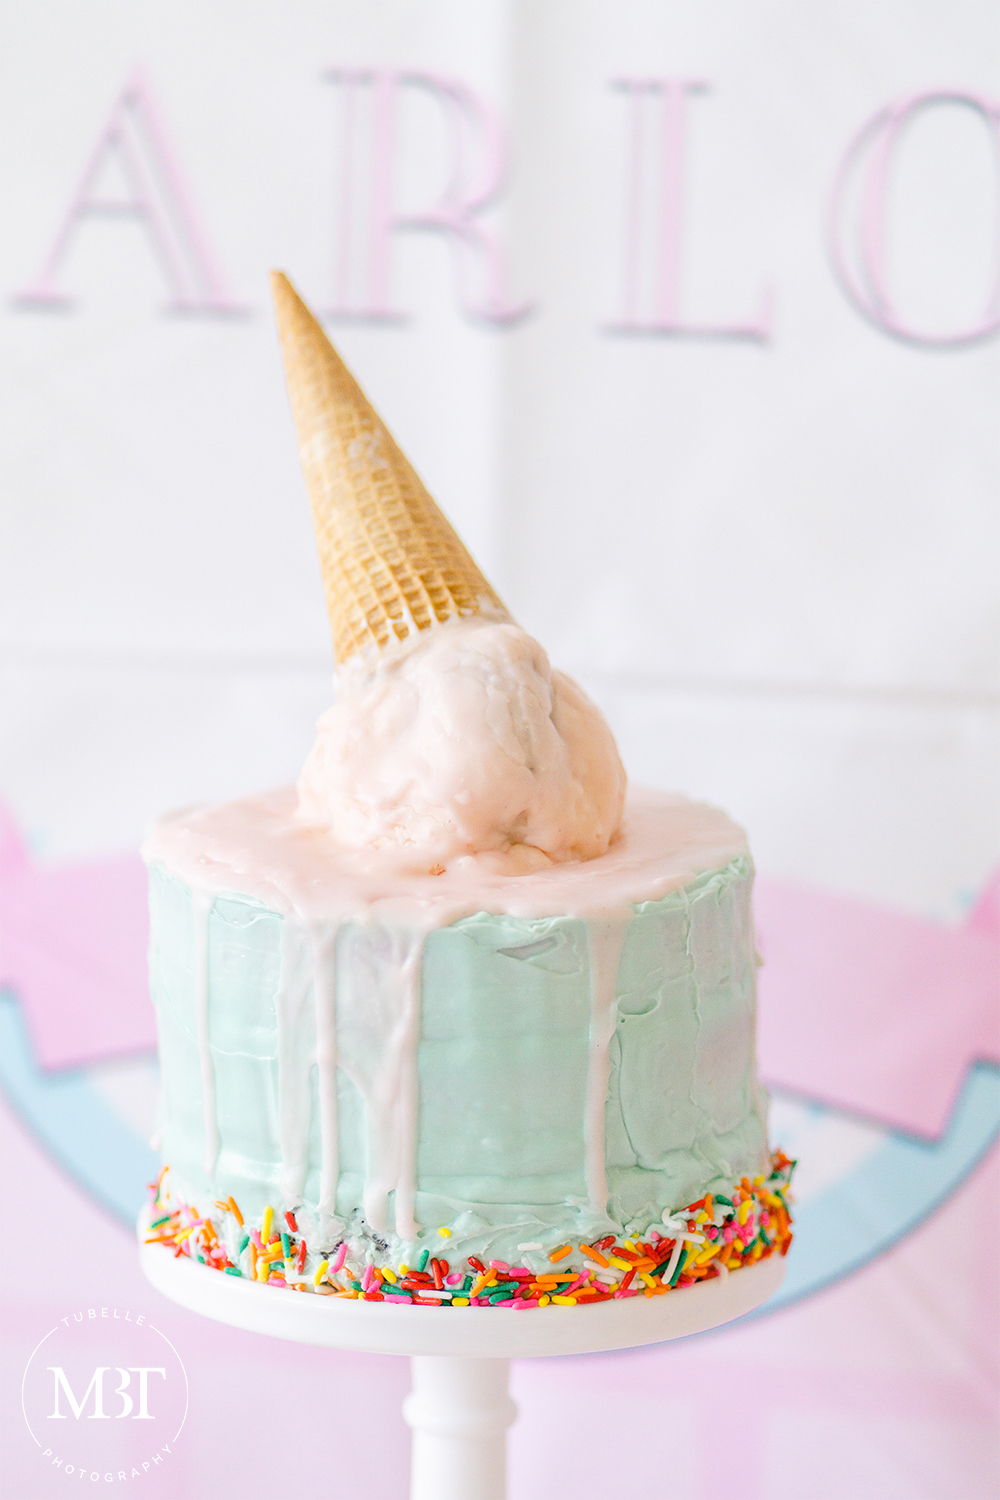 ice cream themed party, details - birthday cake, in Arlington, Virginia, taken by a Washington, DC event photographer